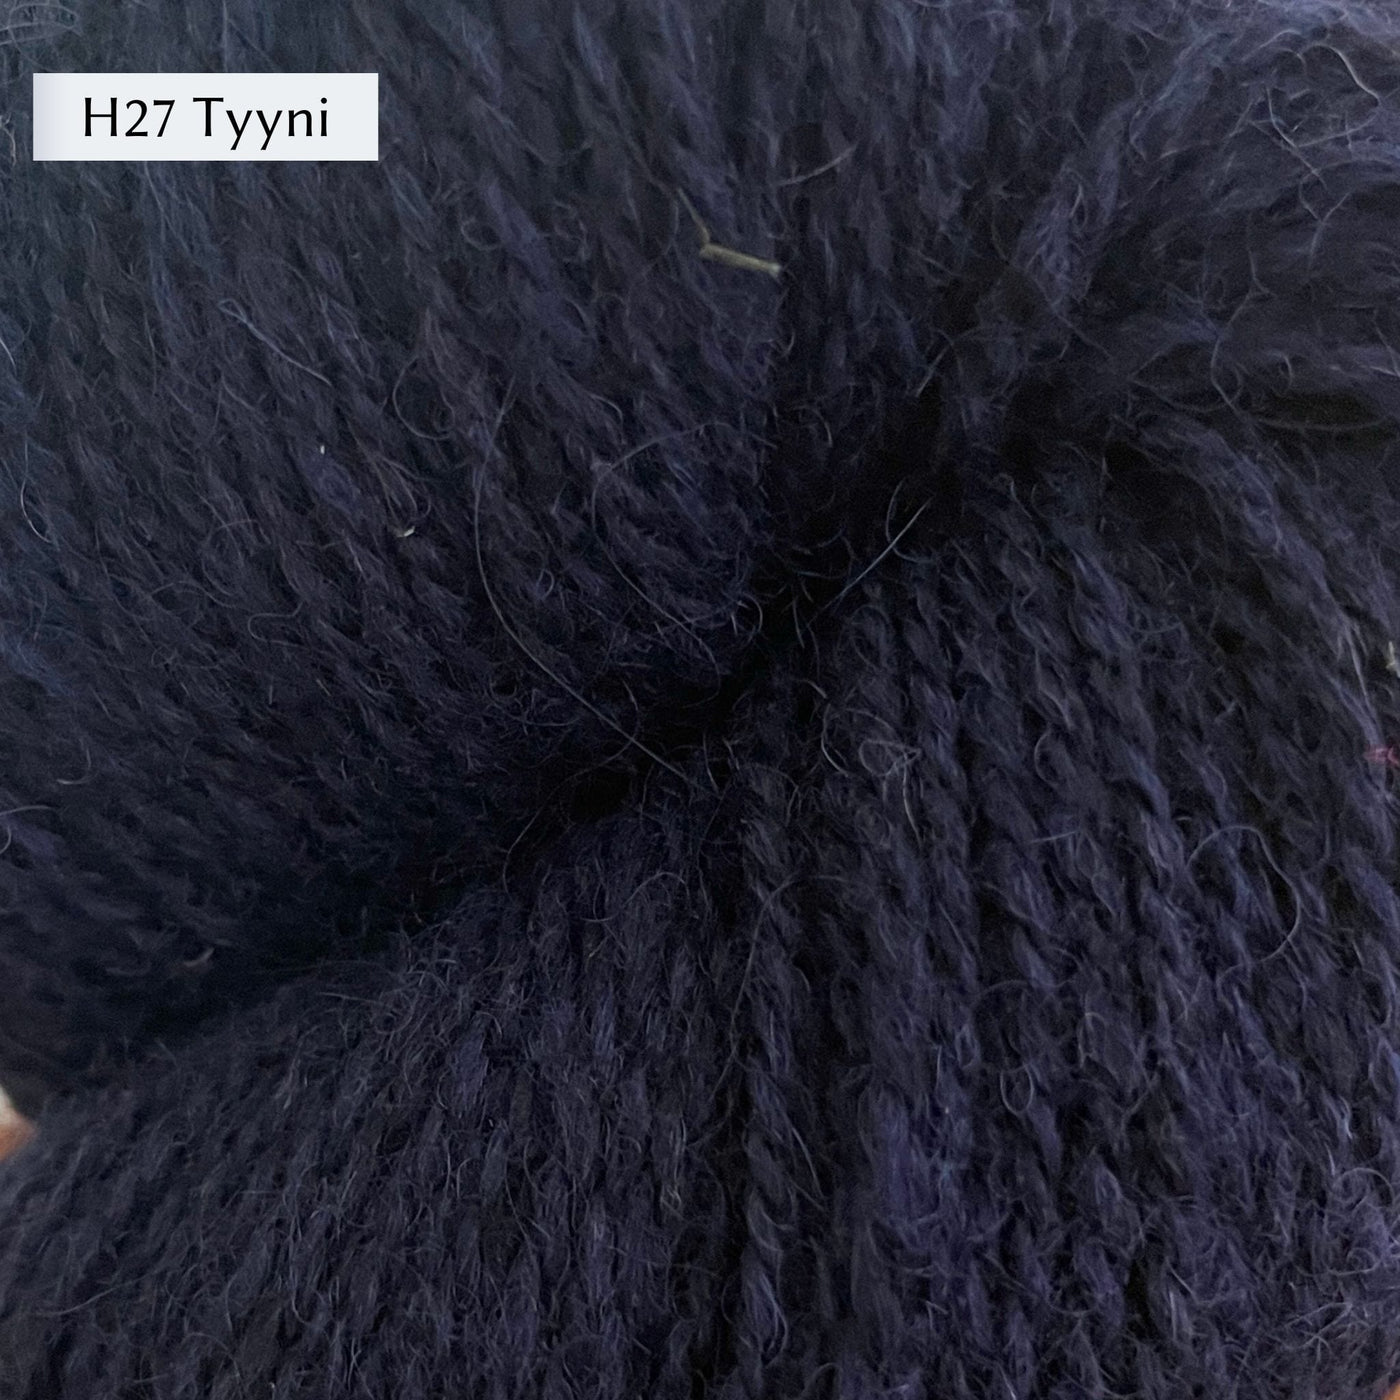 Tukuwool DK Yarn, 100% Finnish Wool shown in colorway H27 Tyyni which is a navy blue color. 